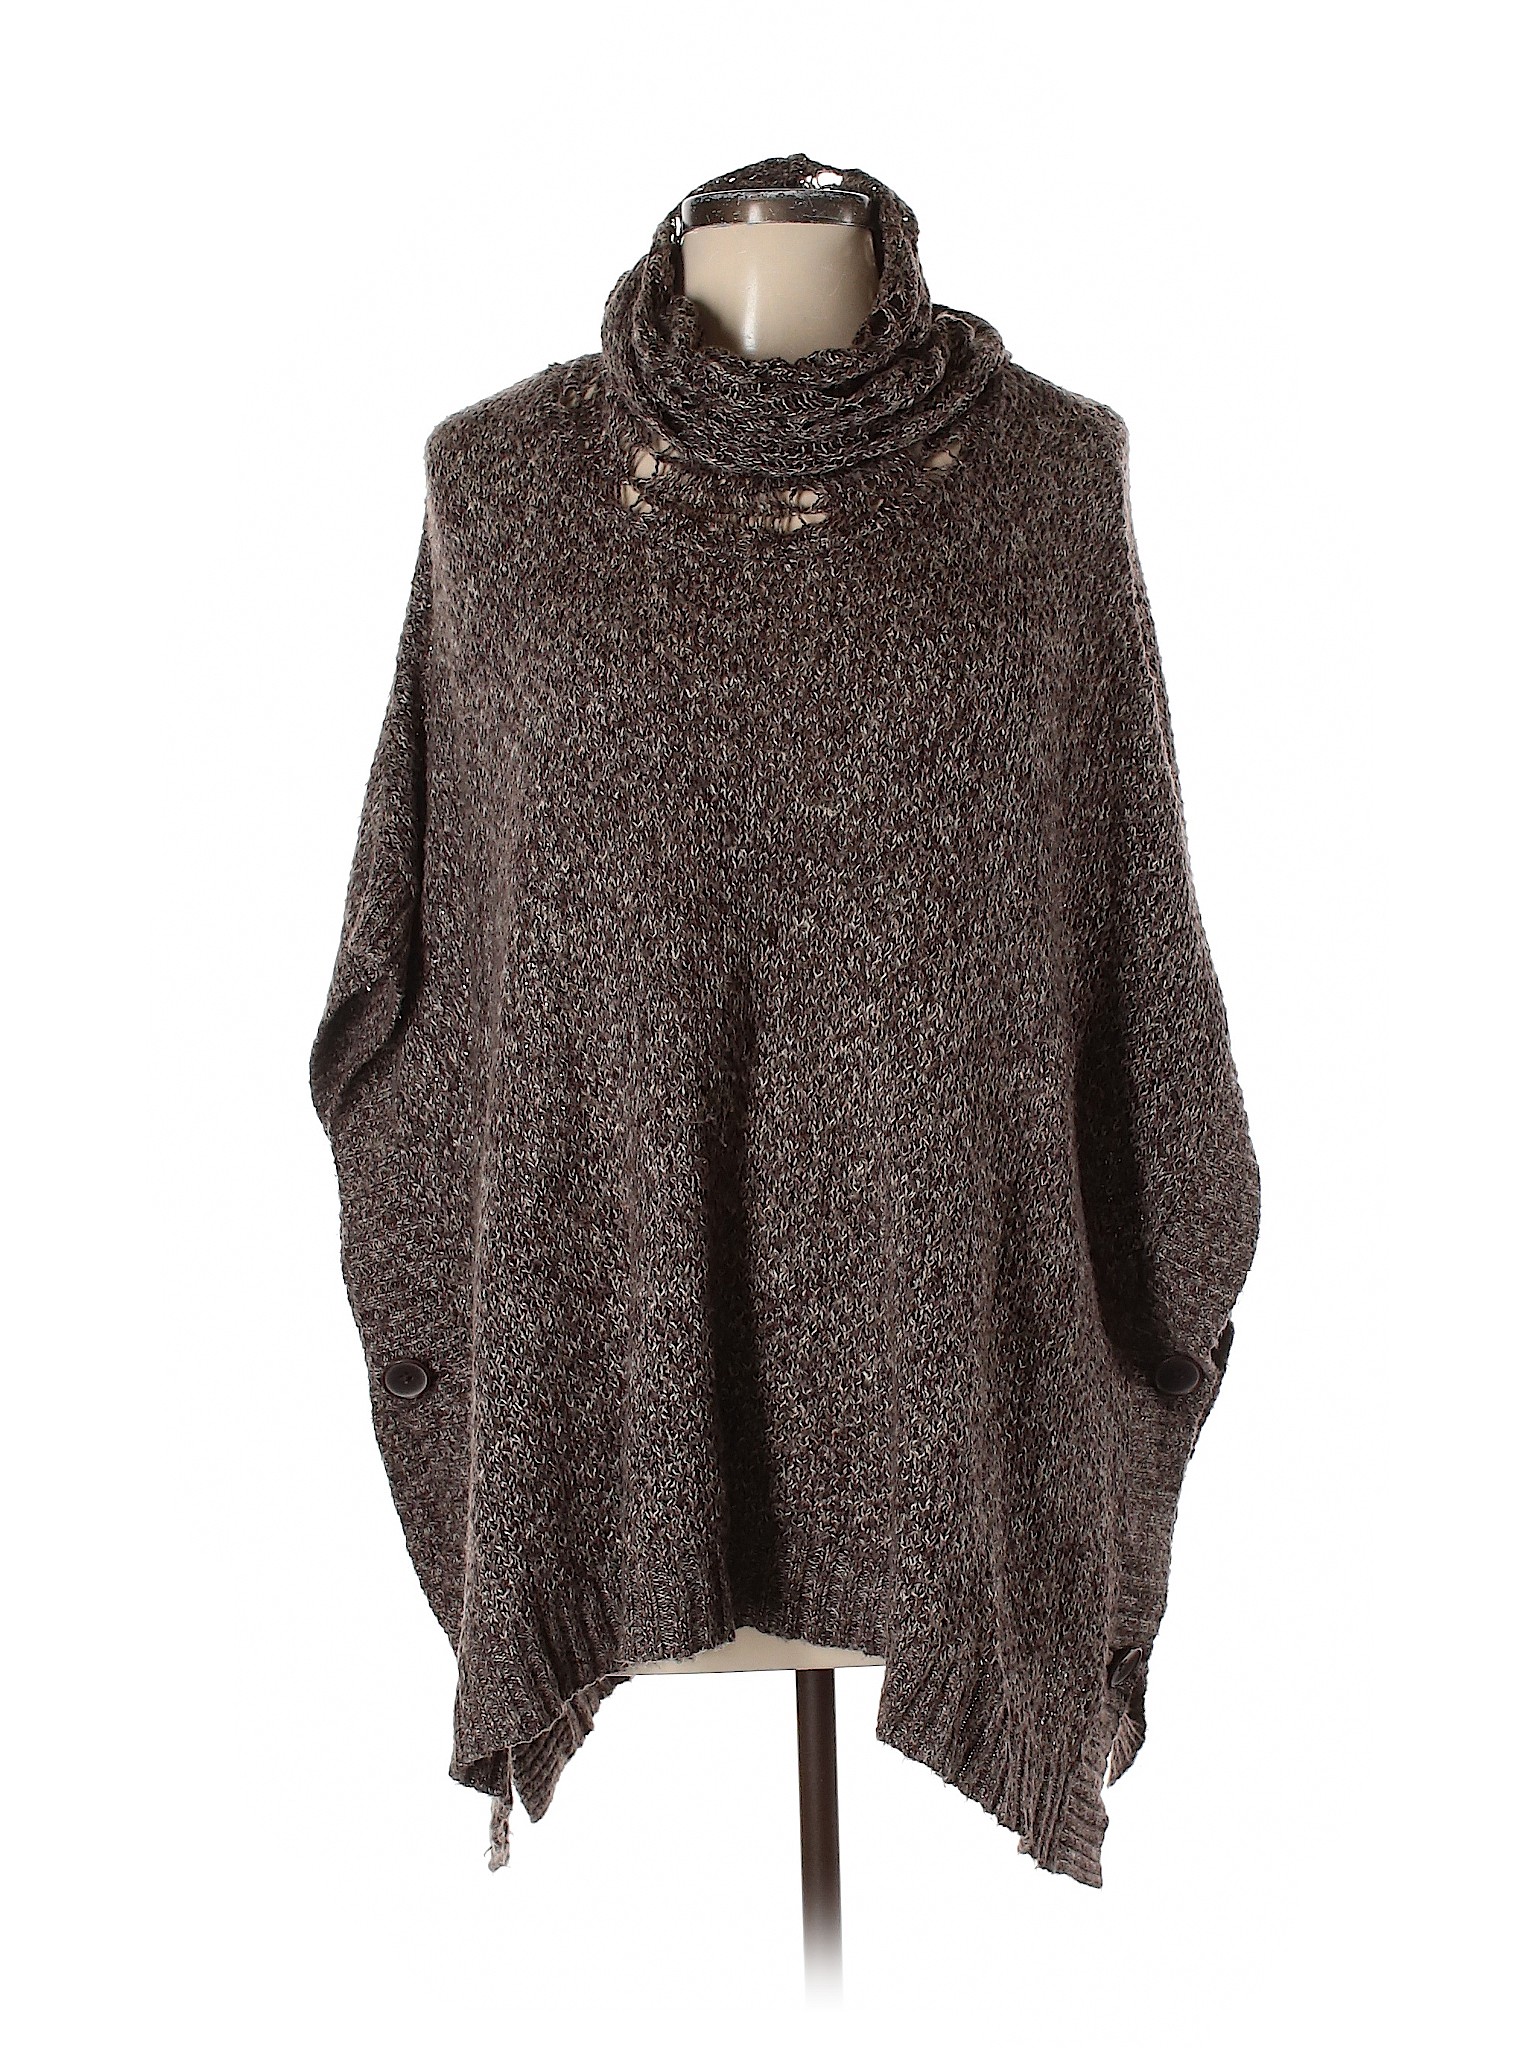 Maurices Brown Poncho Size L - 73% off | thredUP